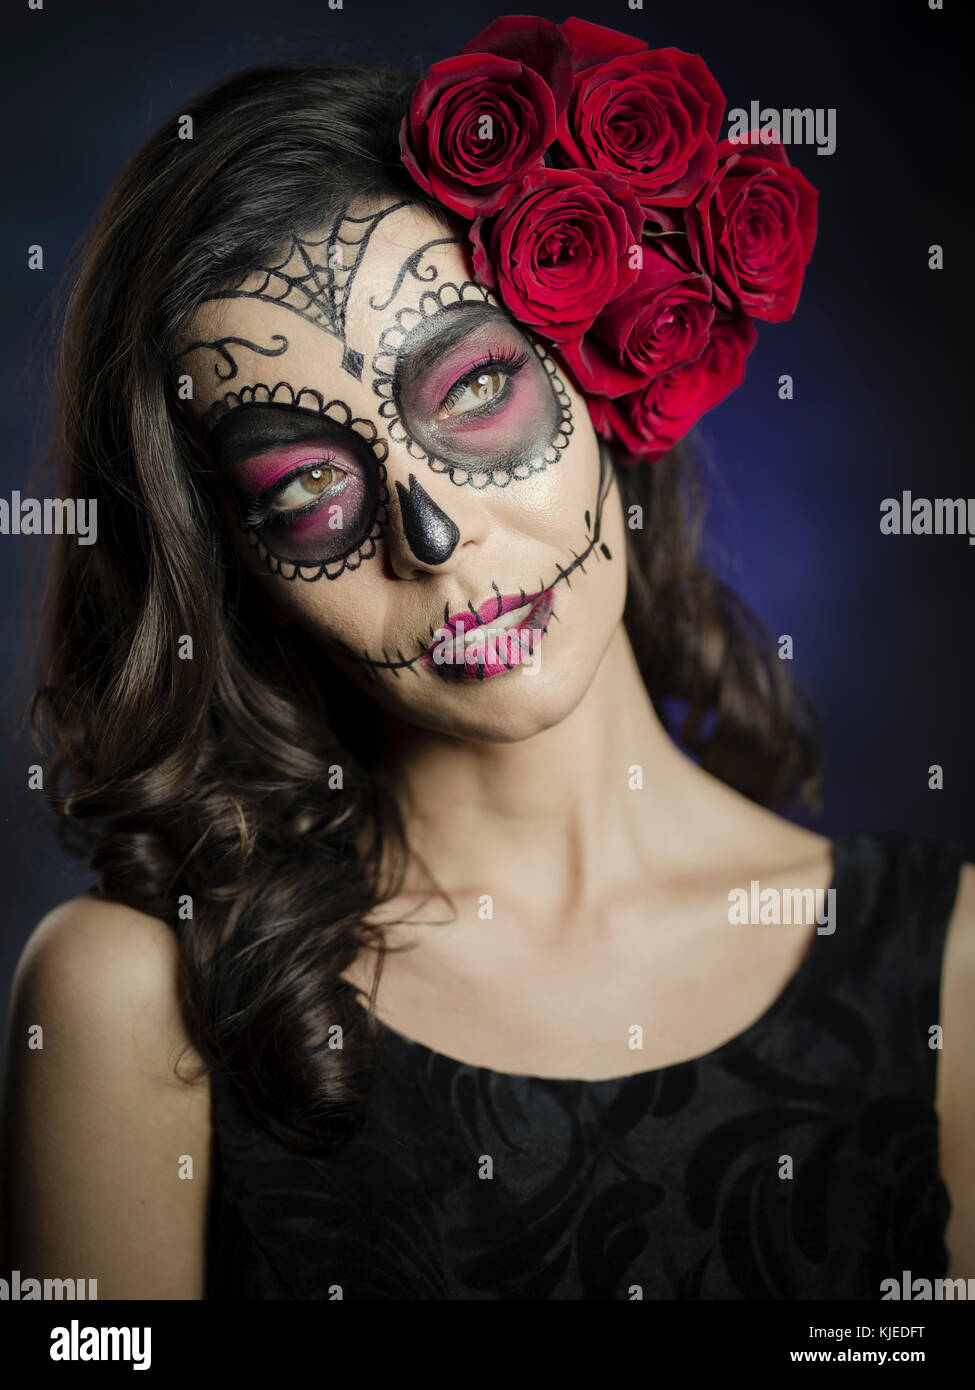 Beautiful Mexican American woman celebrating Día de los Muertos ( Día de Muertos ) is the Mexican holiday also known as Day of the Dead with skull makeup and roses in the style of Catrina. Stock Photo